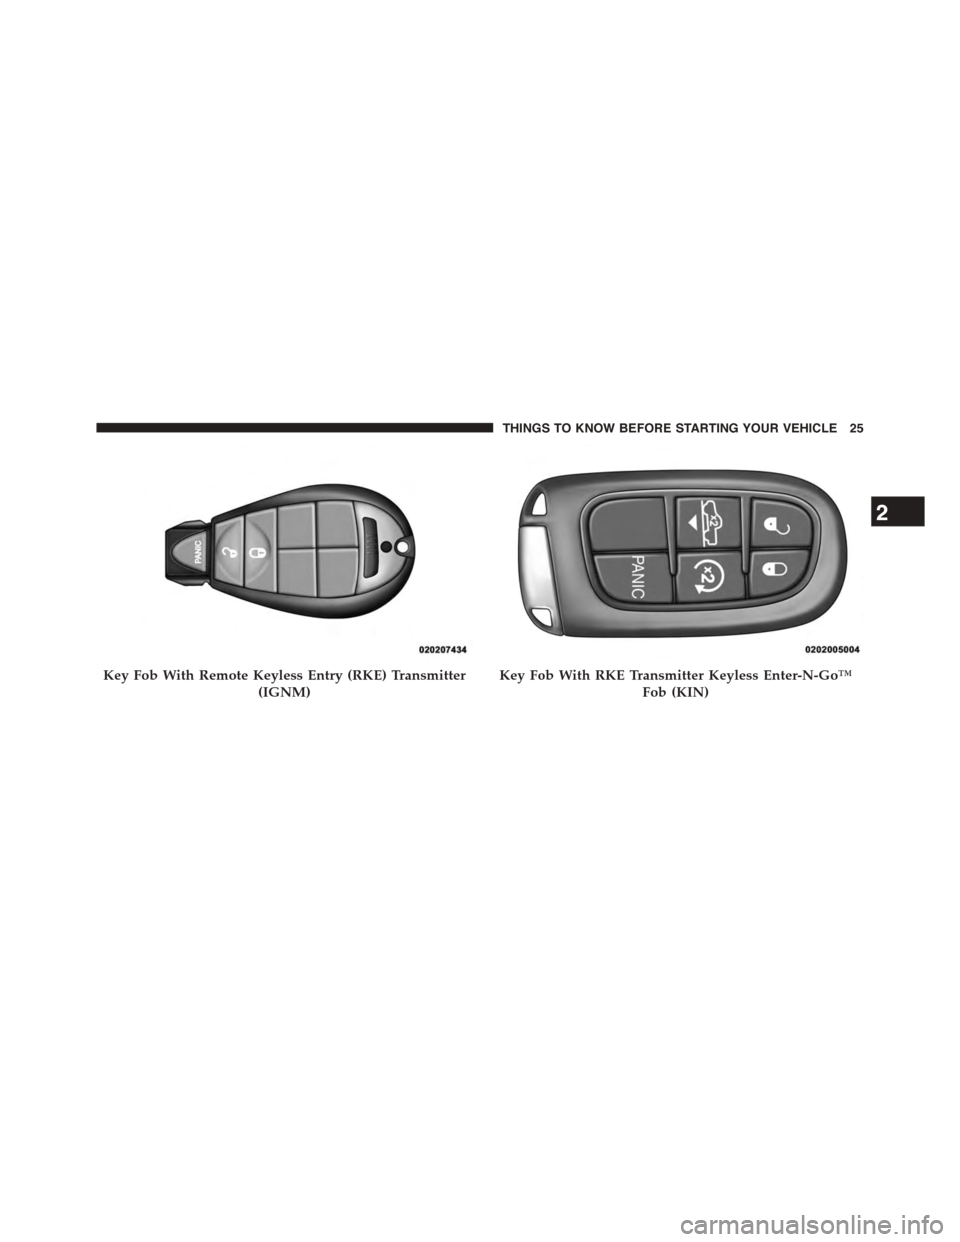 Ram 1500 2015 Owners Guide Key Fob With Remote Keyless Entry (RKE) Transmitter
(IGNM)
Key Fob With RKE Transmitter Keyless Enter-N-Go™
Fob (KIN)
2
THINGS TO KNOW BEFORE STARTING YOUR VEHICLE 25 